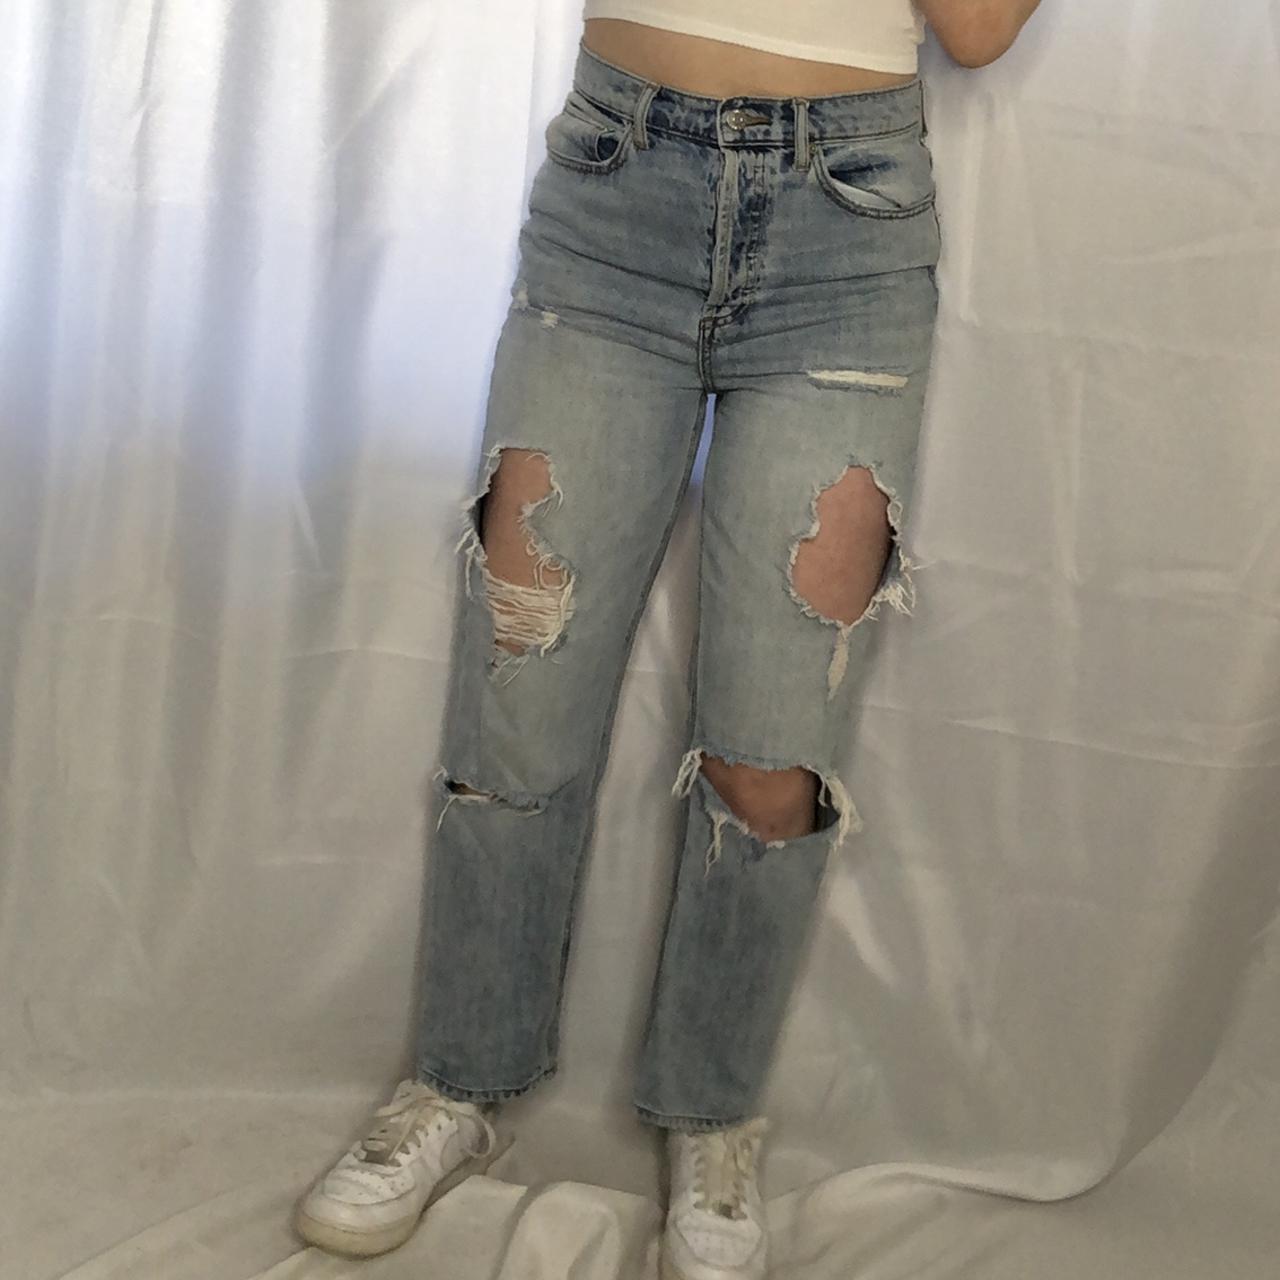 Product Image 2 - Distressed Urban Outfitters Jeans. Light